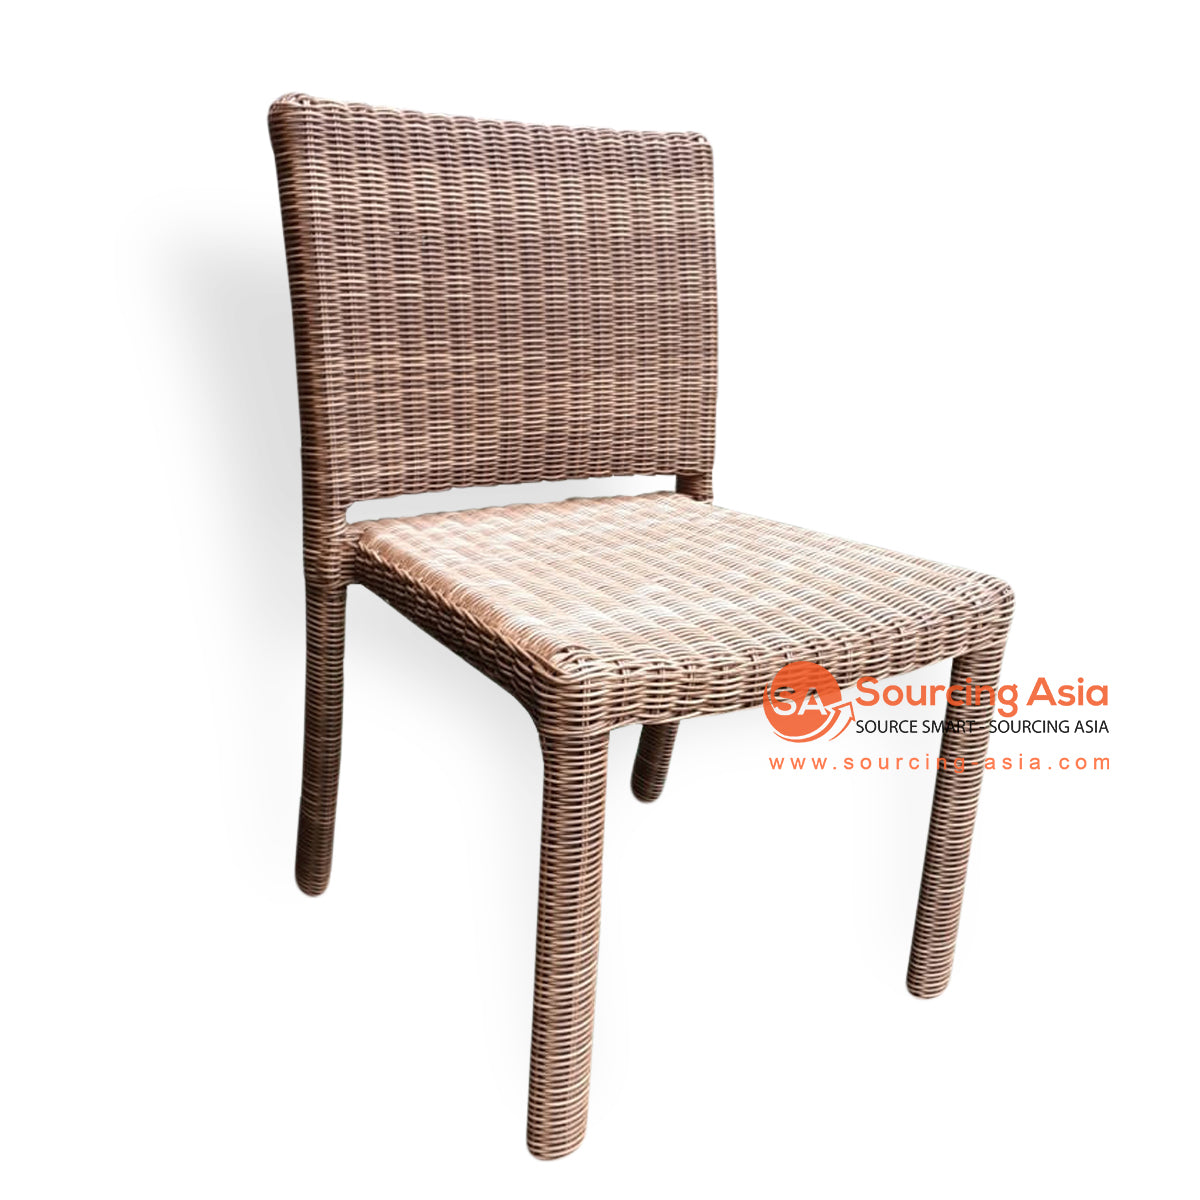 DJO027 NATURAL SYNTHETIC RATTAN OUTDOOR DINING CHAIR